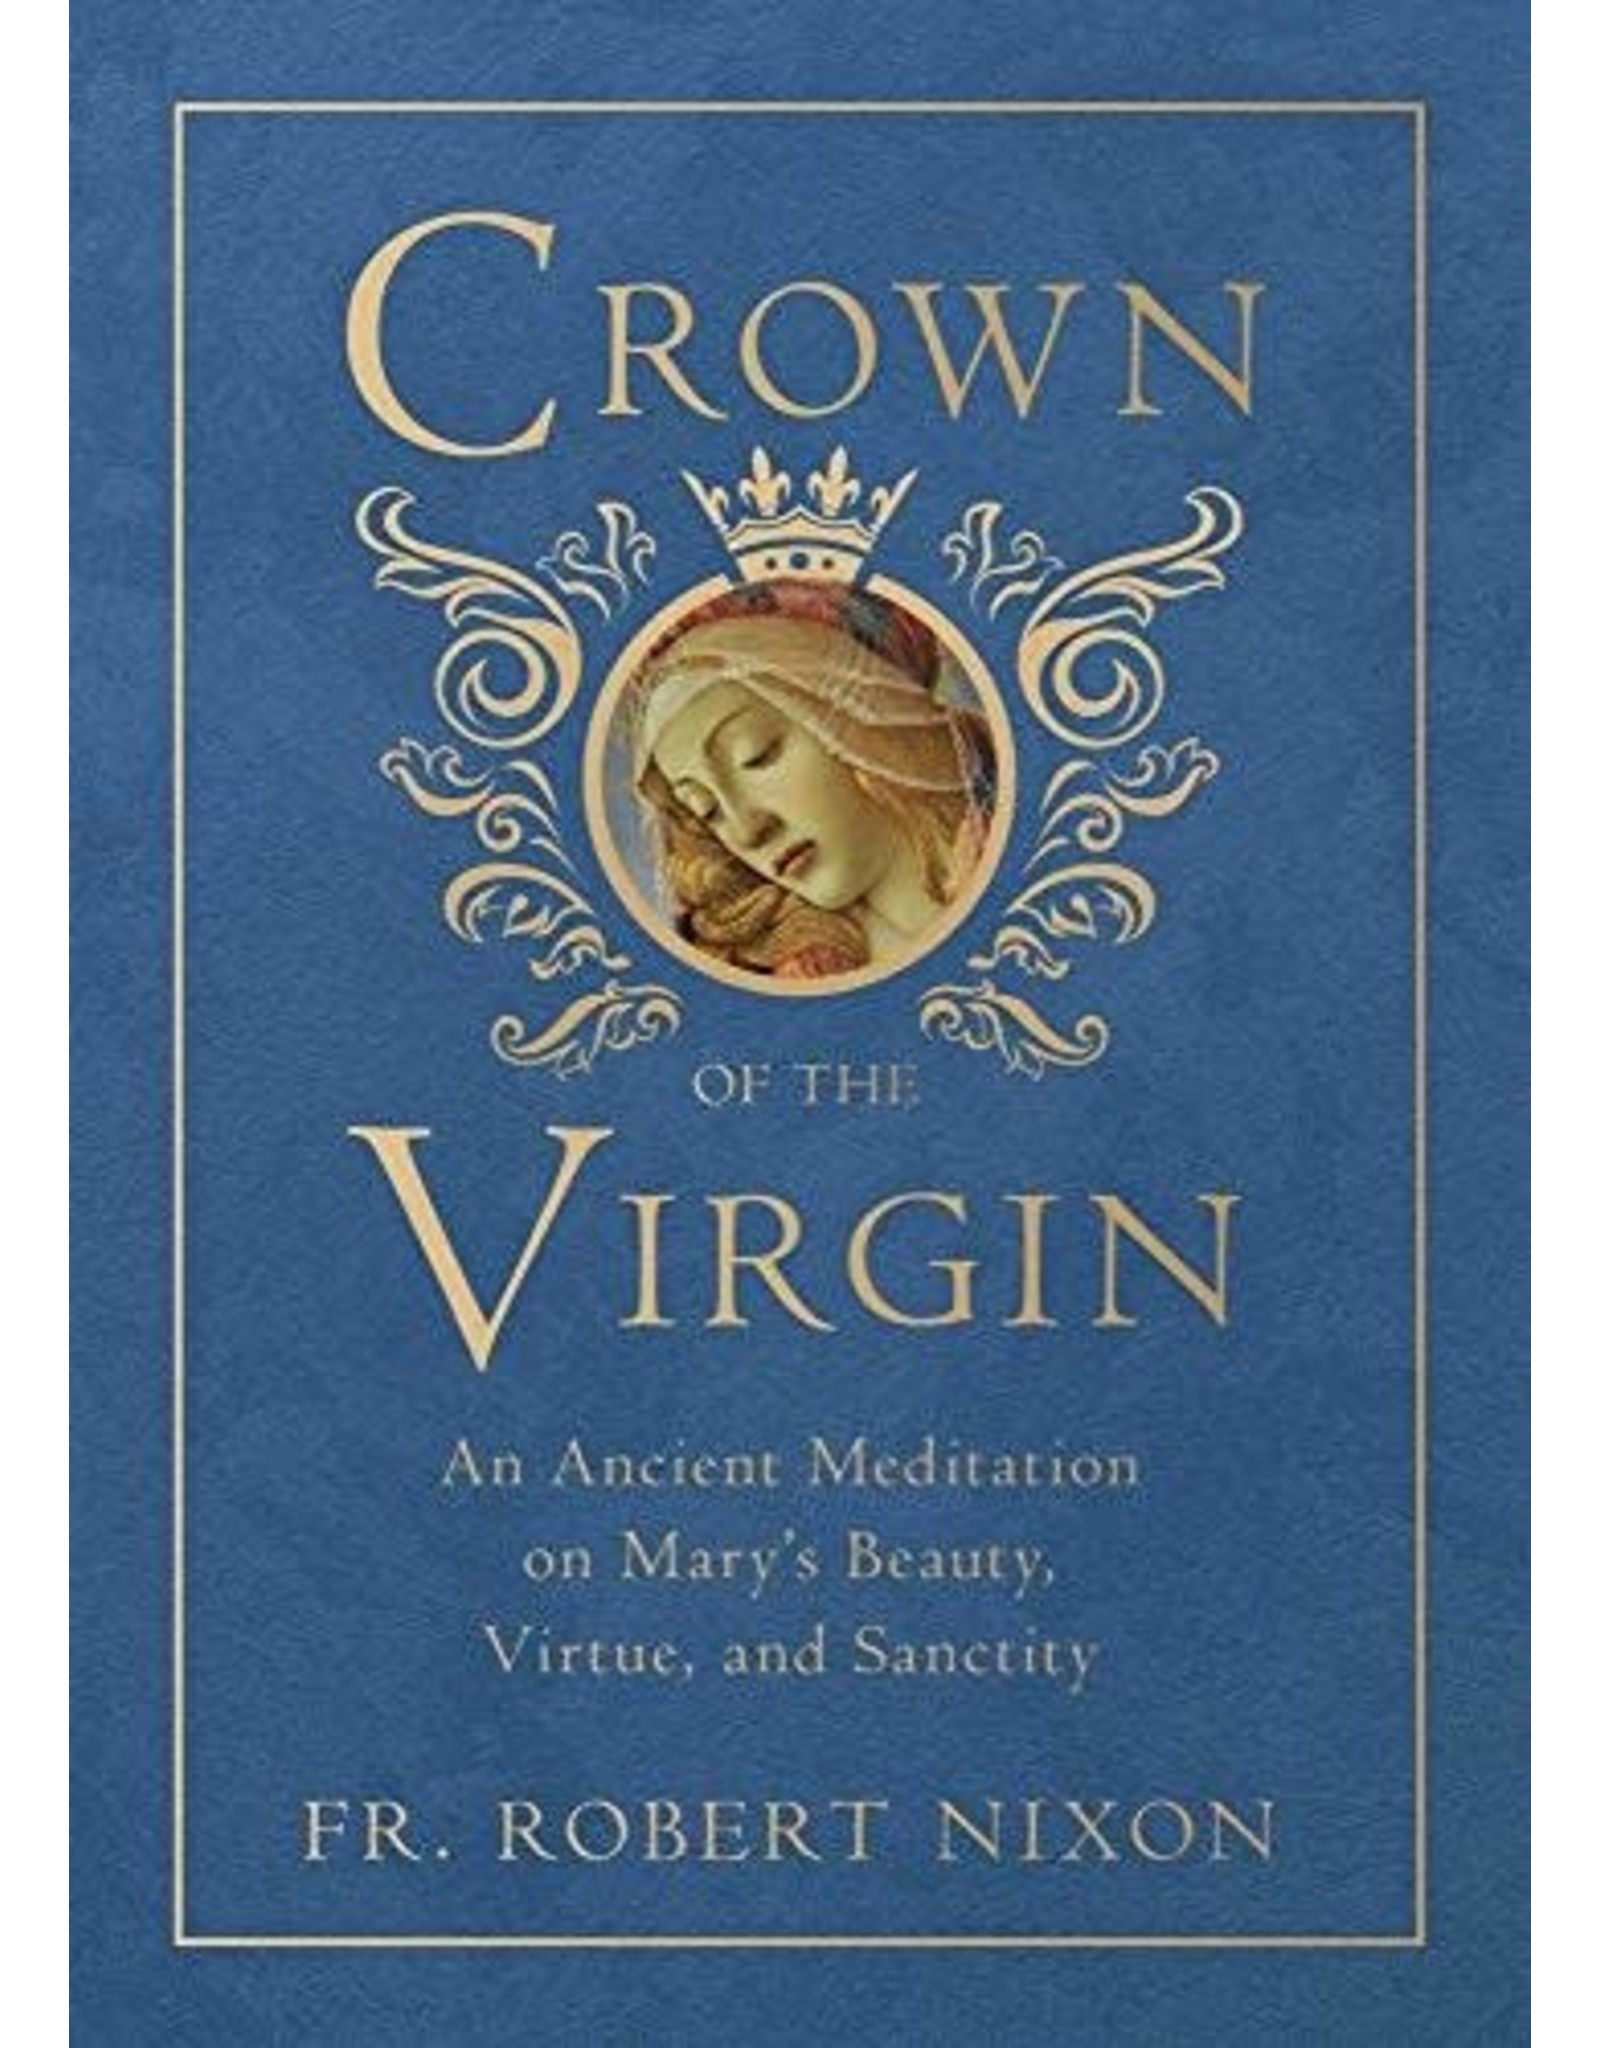 Tan Books Crown Of The Virgin: An Ancient Meditation On Mary's Beauty, Virtue, And Sanctity by Fr. Robert Nixon, OSB (Hardcover)